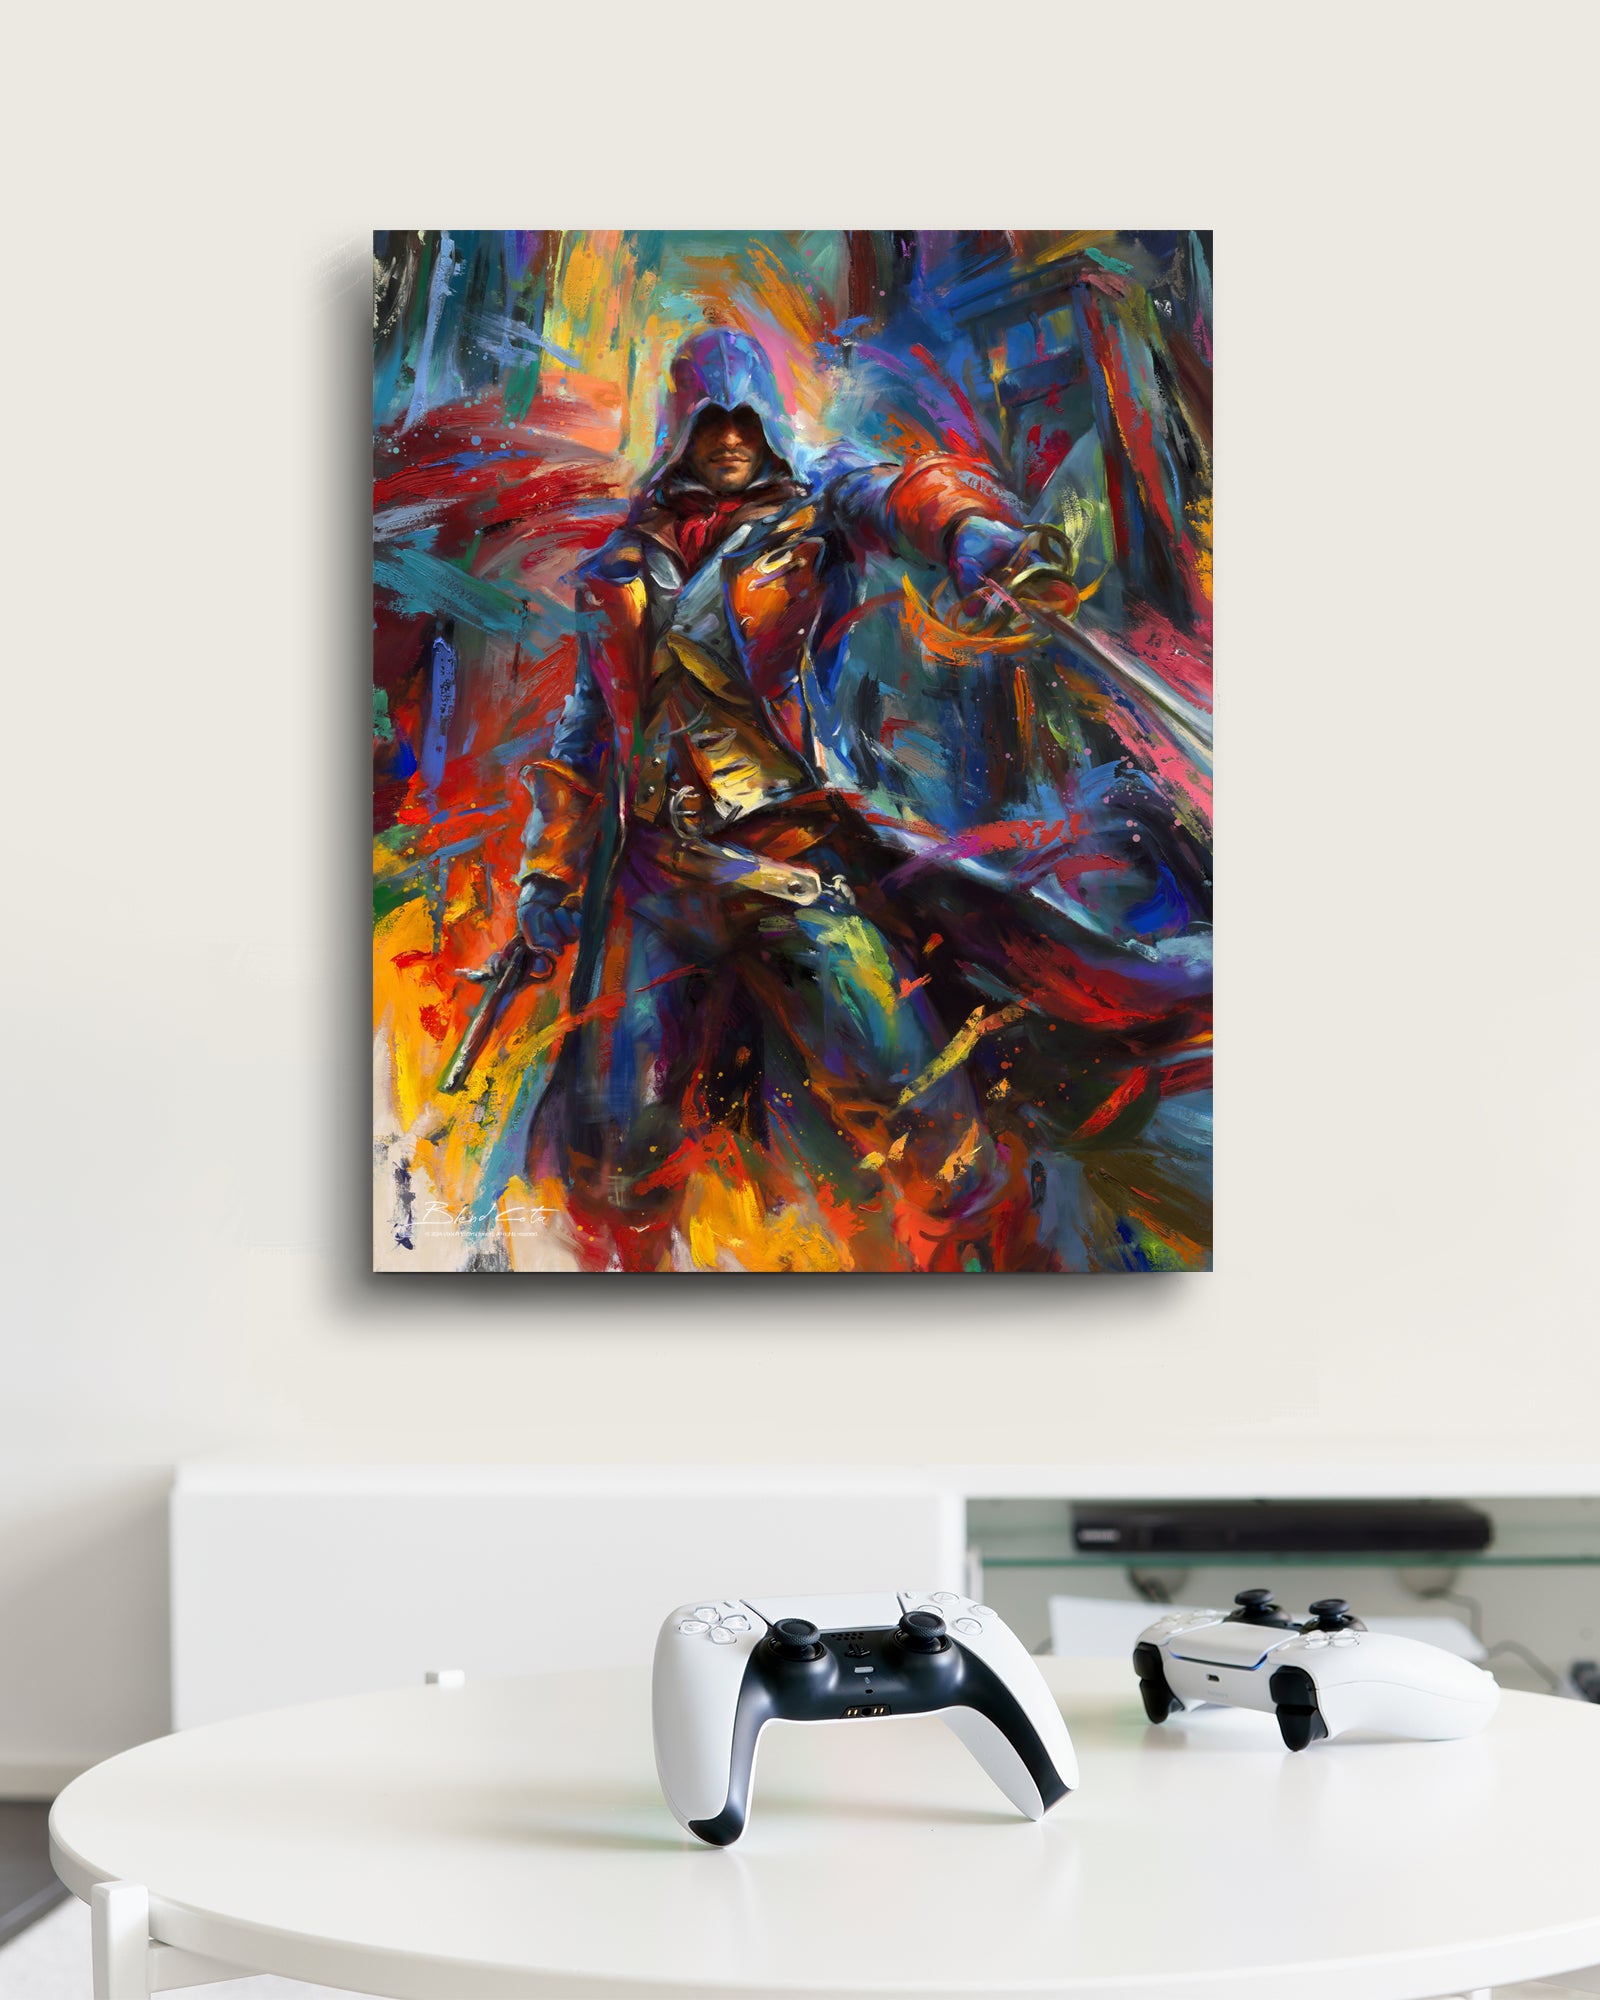 Hand embellished limited edition print on canvas of Ubisoft's Assassin's Creed Arno Dorian of Unity painted with colorful brushstrokes and energy in motion in a room setting.